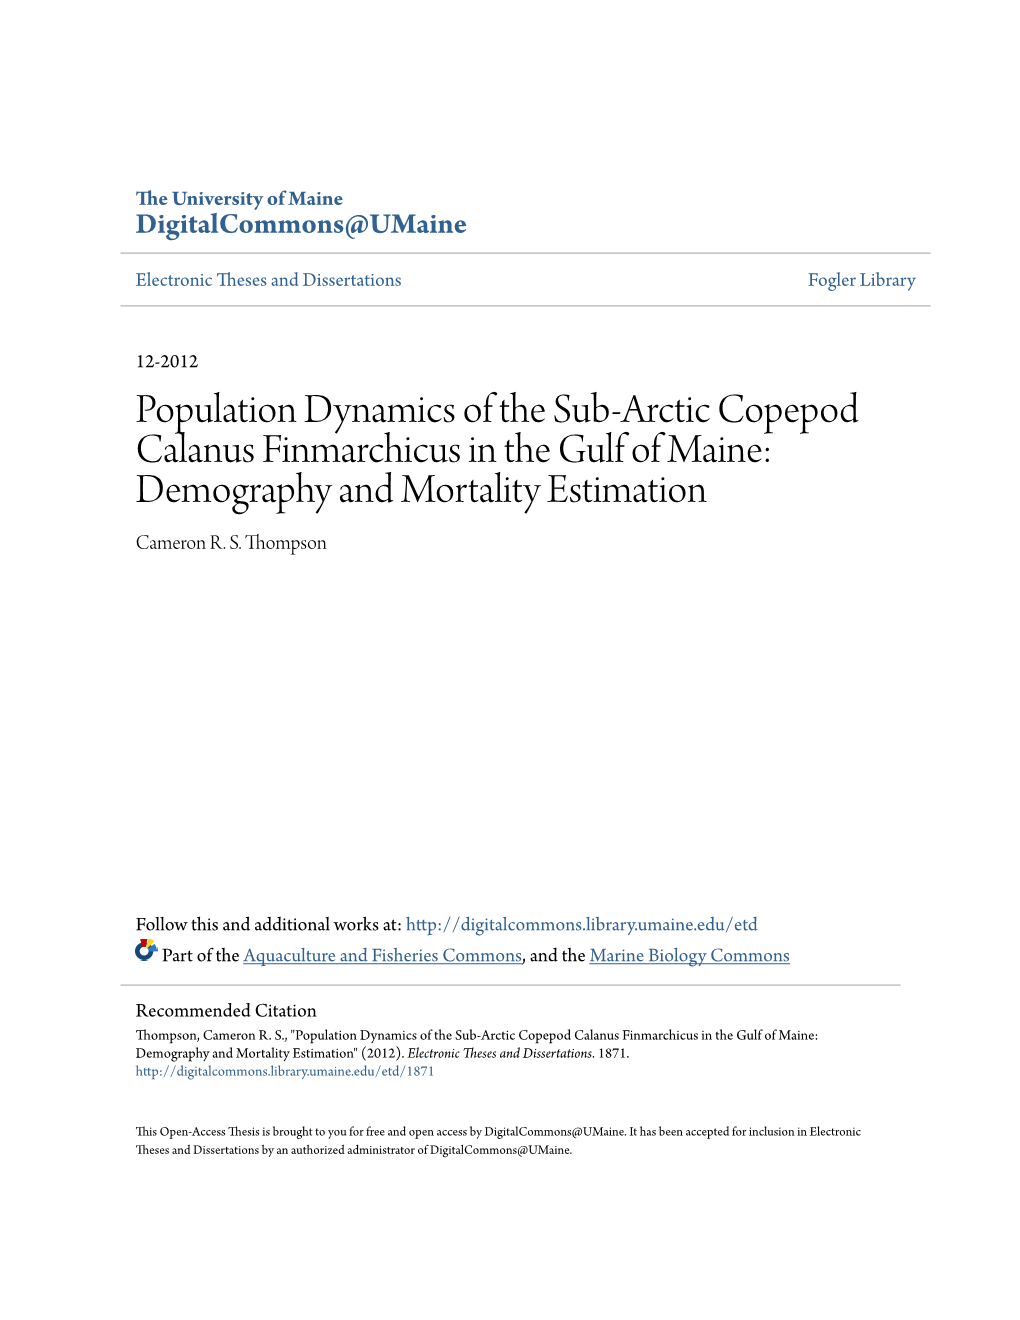 Population Dynamics of the Sub-Arctic Copepod Calanus Finmarchicus in the Gulf of Maine: Demography and Mortality Estimation Cameron R